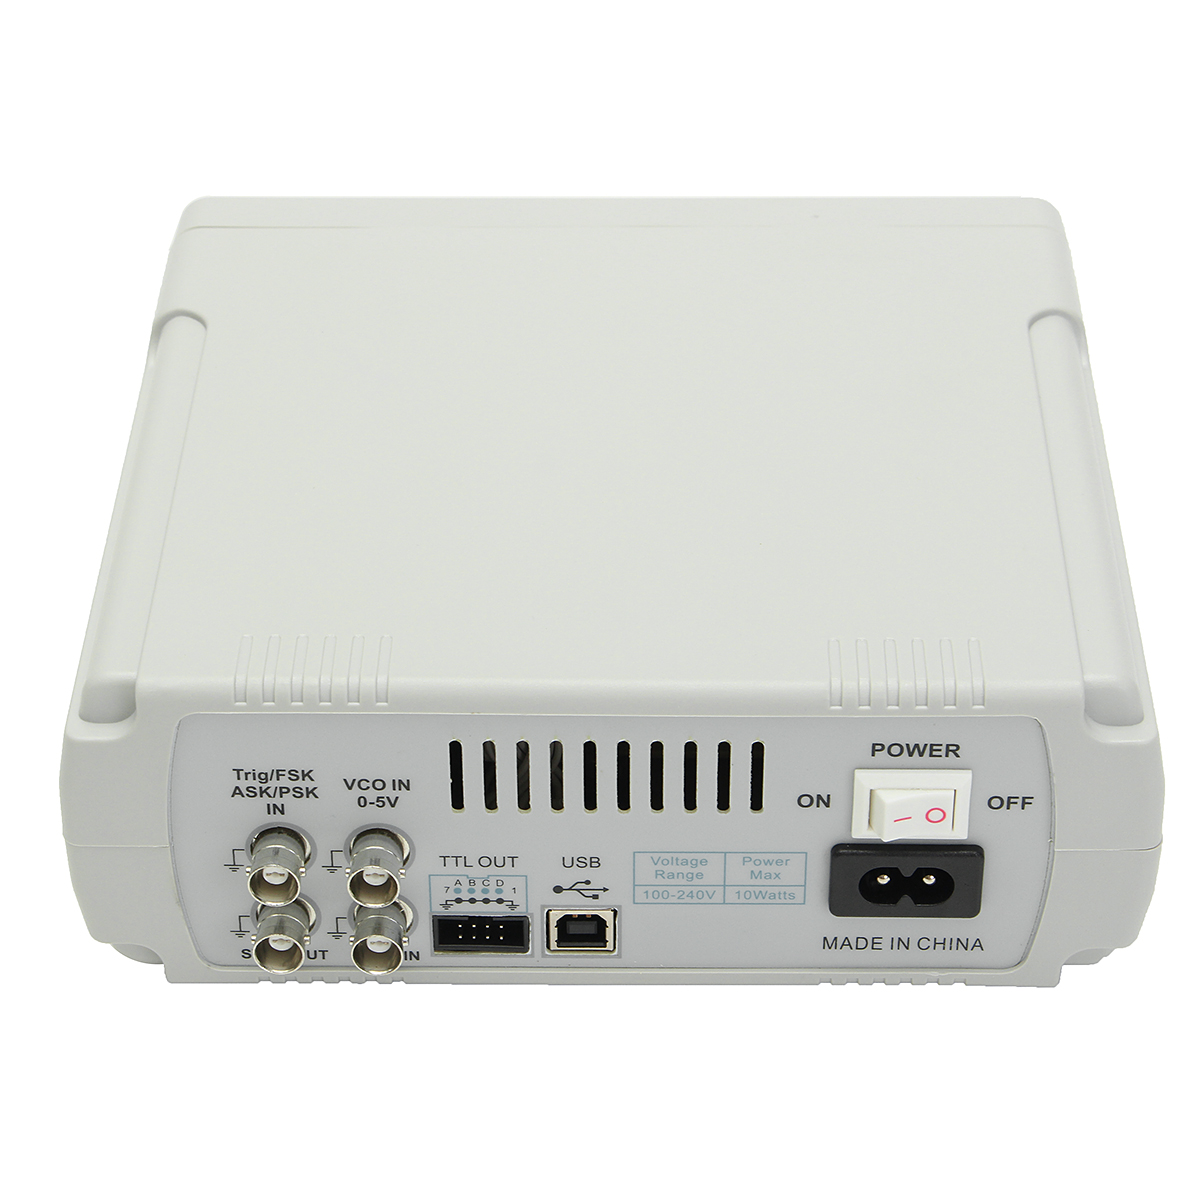 FY6600-Digital-30MHz-60MHz-Dual-Channel-DDS-Function-Arbitrary-Waveform-Signal-Generator-Frequency-M-1957884-6